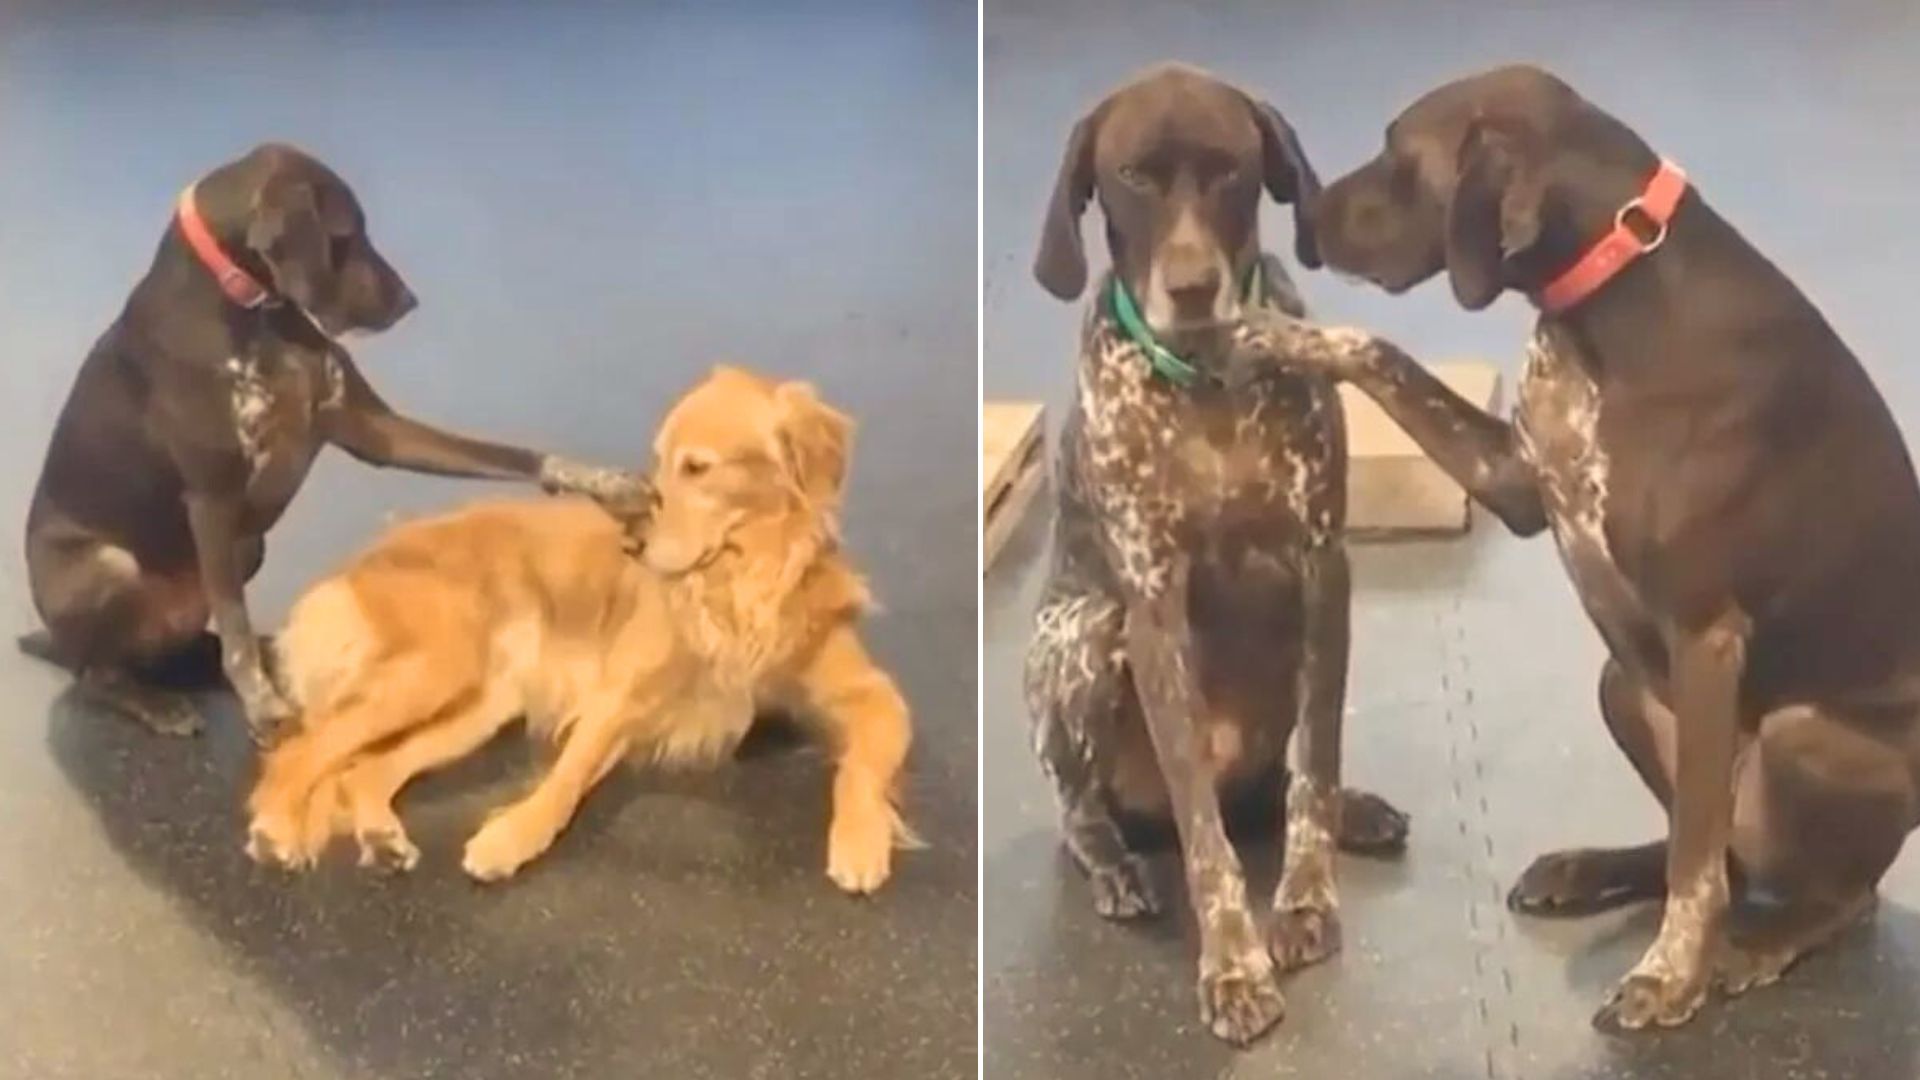 Affectionate Dog Enjoys Petting The Other Pups And They Seem To Love It Too